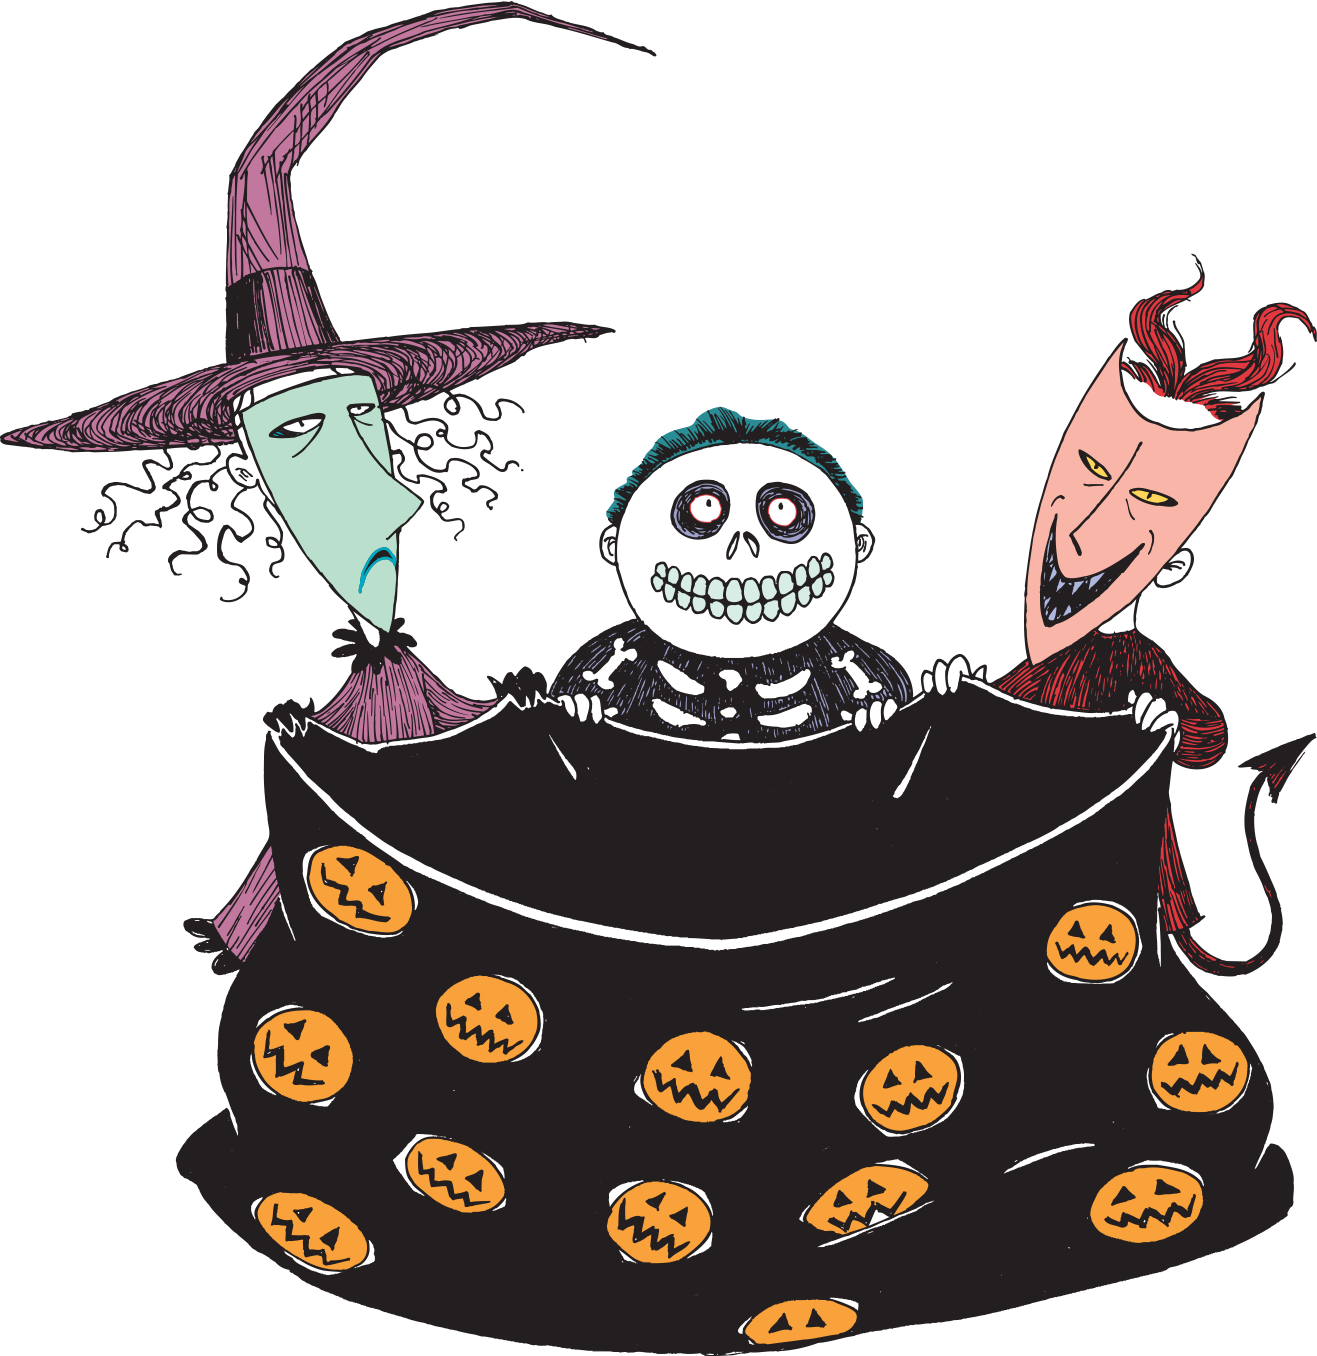 Download Nightmare Before Christmas Skull Clipart - Free Vector ...